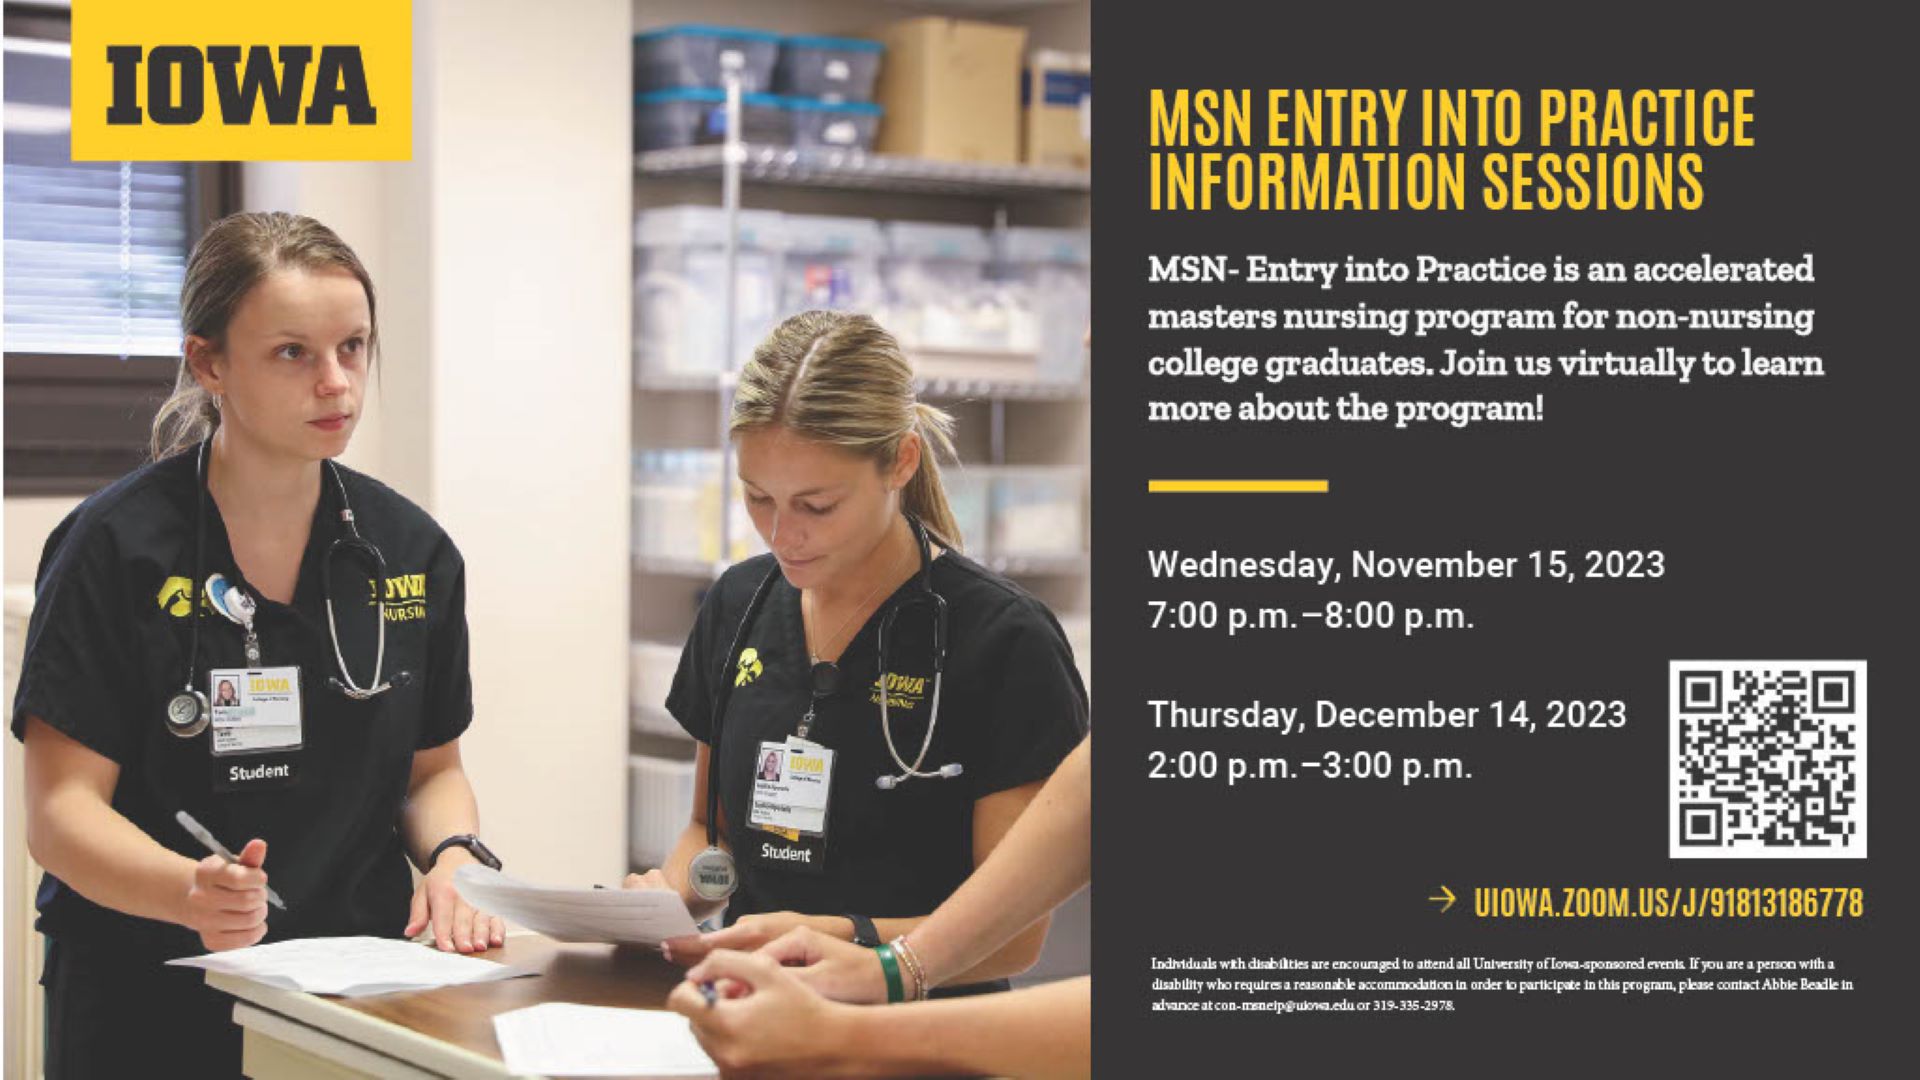 Image of two women nurses with text: MSN Info sessions Nov 15 7 pm and Dec 14 2 pm over zoom